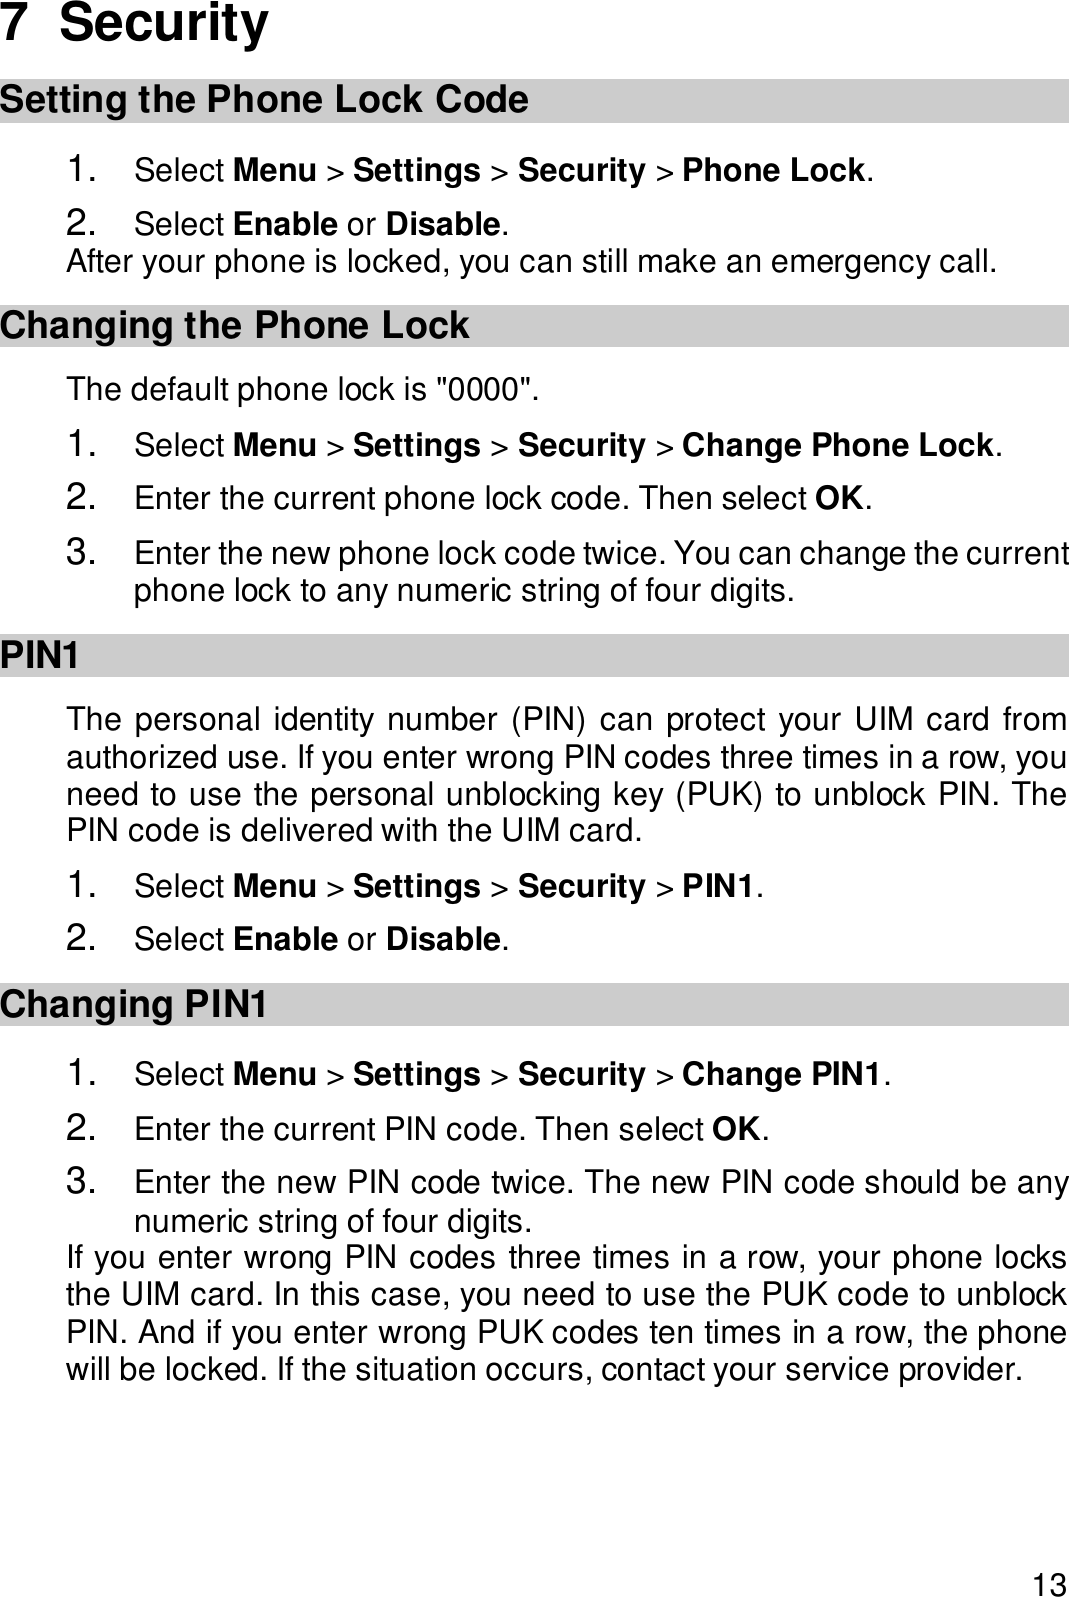  13 7  Security Setting the Phone Lock Code 1.  Select Menu &gt; Settings &gt; Security &gt; Phone Lock. 2.  Select Enable or Disable. After your phone is locked, you can still make an emergency call. Changing the Phone Lock The default phone lock is &quot;0000&quot;. 1.  Select Menu &gt; Settings &gt; Security &gt; Change Phone Lock. 2.  Enter the current phone lock code. Then select OK. 3.  Enter the new phone lock code twice. You can change the current phone lock to any numeric string of four digits. PIN1 The personal identity number (PIN) can protect your UIM card from authorized use. If you enter wrong PIN codes three times in a row, you need to use the personal unblocking key (PUK) to unblock PIN. The PIN code is delivered with the UIM card. 1.  Select Menu &gt; Settings &gt; Security &gt; PIN1. 2.  Select Enable or Disable. Changing PIN1 1.  Select Menu &gt; Settings &gt; Security &gt; Change PIN1. 2.  Enter the current PIN code. Then select OK. 3.  Enter the new PIN code twice. The new PIN code should be any numeric string of four digits. If you enter wrong PIN codes three times in a row, your phone locks the UIM card. In this case, you need to use the PUK code to unblock PIN. And if you enter wrong PUK codes ten times in a row, the phone will be locked. If the situation occurs, contact your service provider.